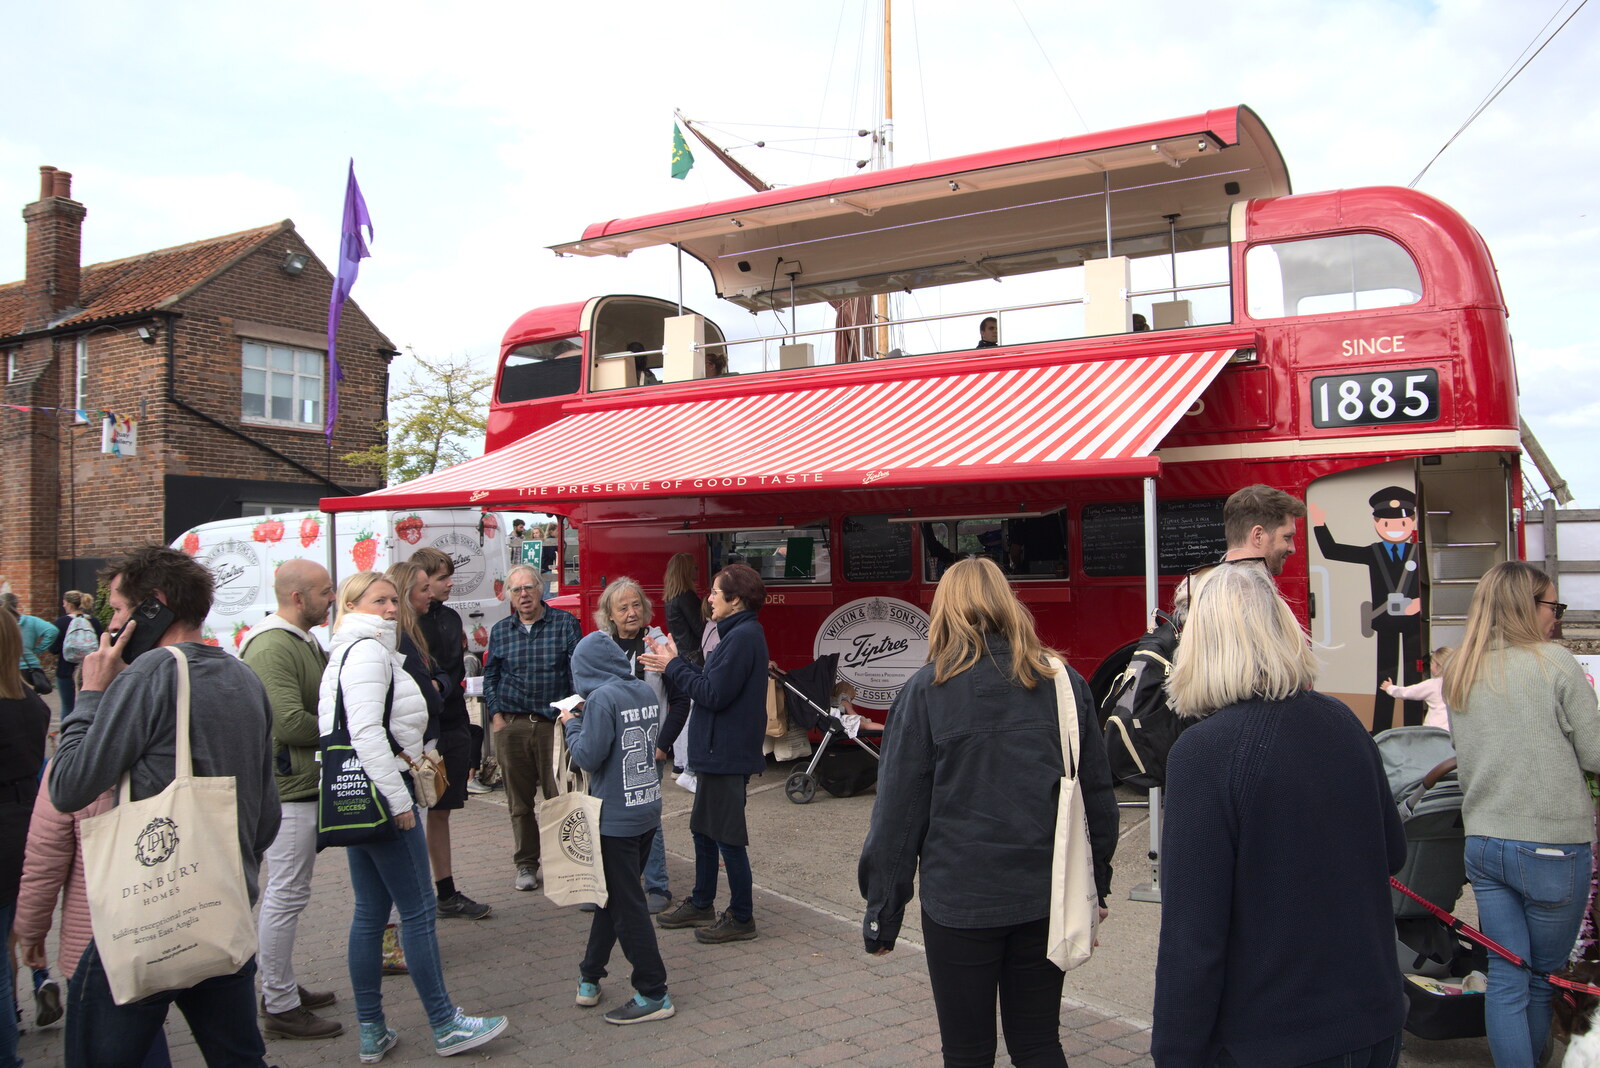 A Routemaster bus has been interestingly converted from The Aldeburgh Food Festival, Snape Maltings, Suffolk - 25th September 2022